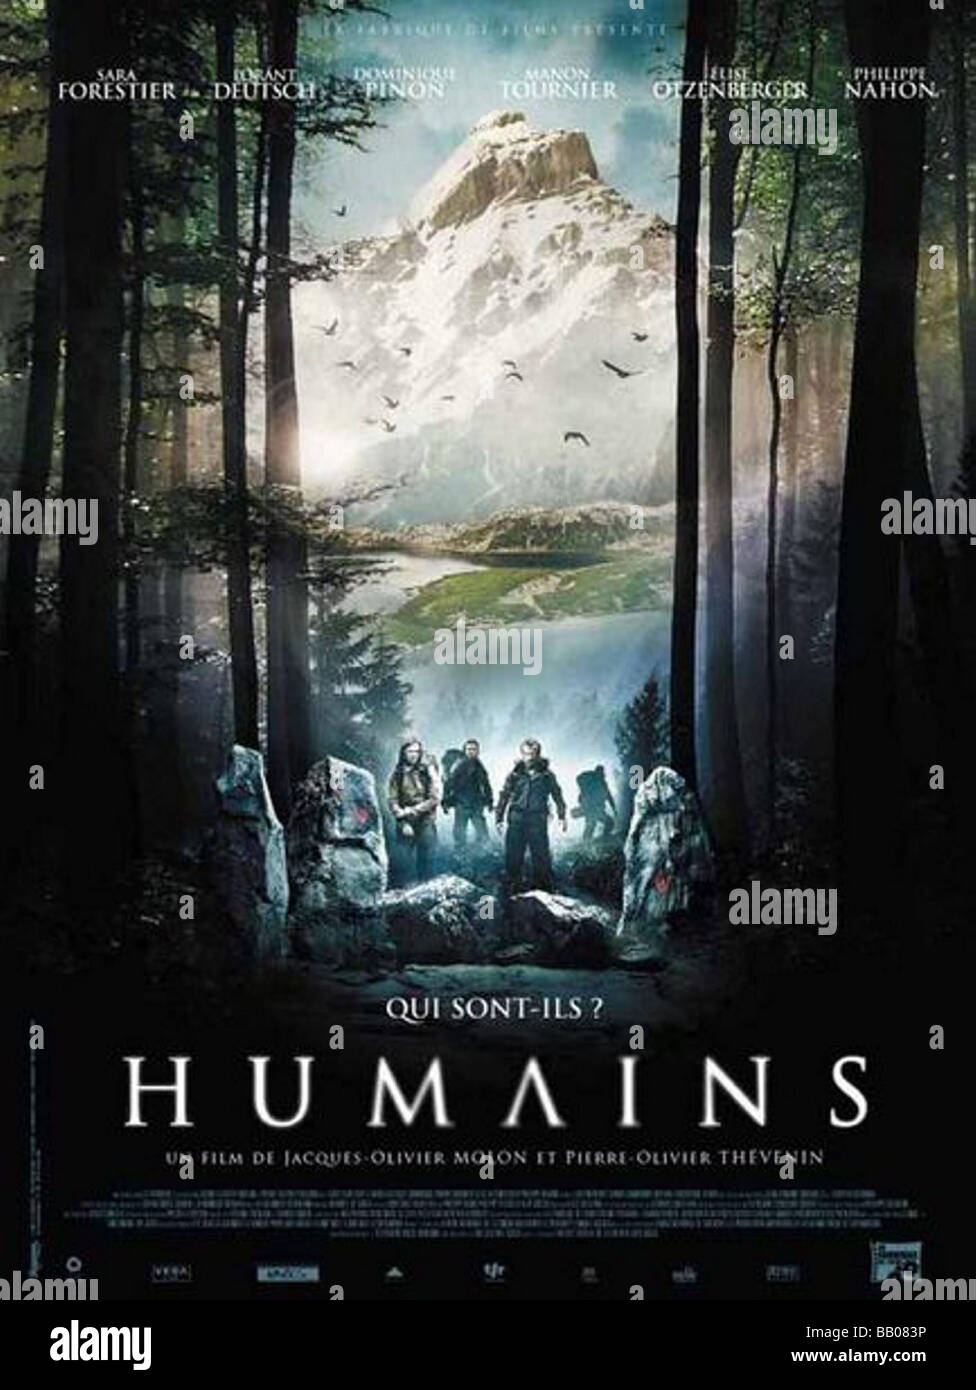 Humains Humans Year: 2009 France / Switzerland / Luxembourg Directors : Jacques-Olivier Molon, Pierre-Olivier Thévenin Movie poster (Fr) Stock Photo